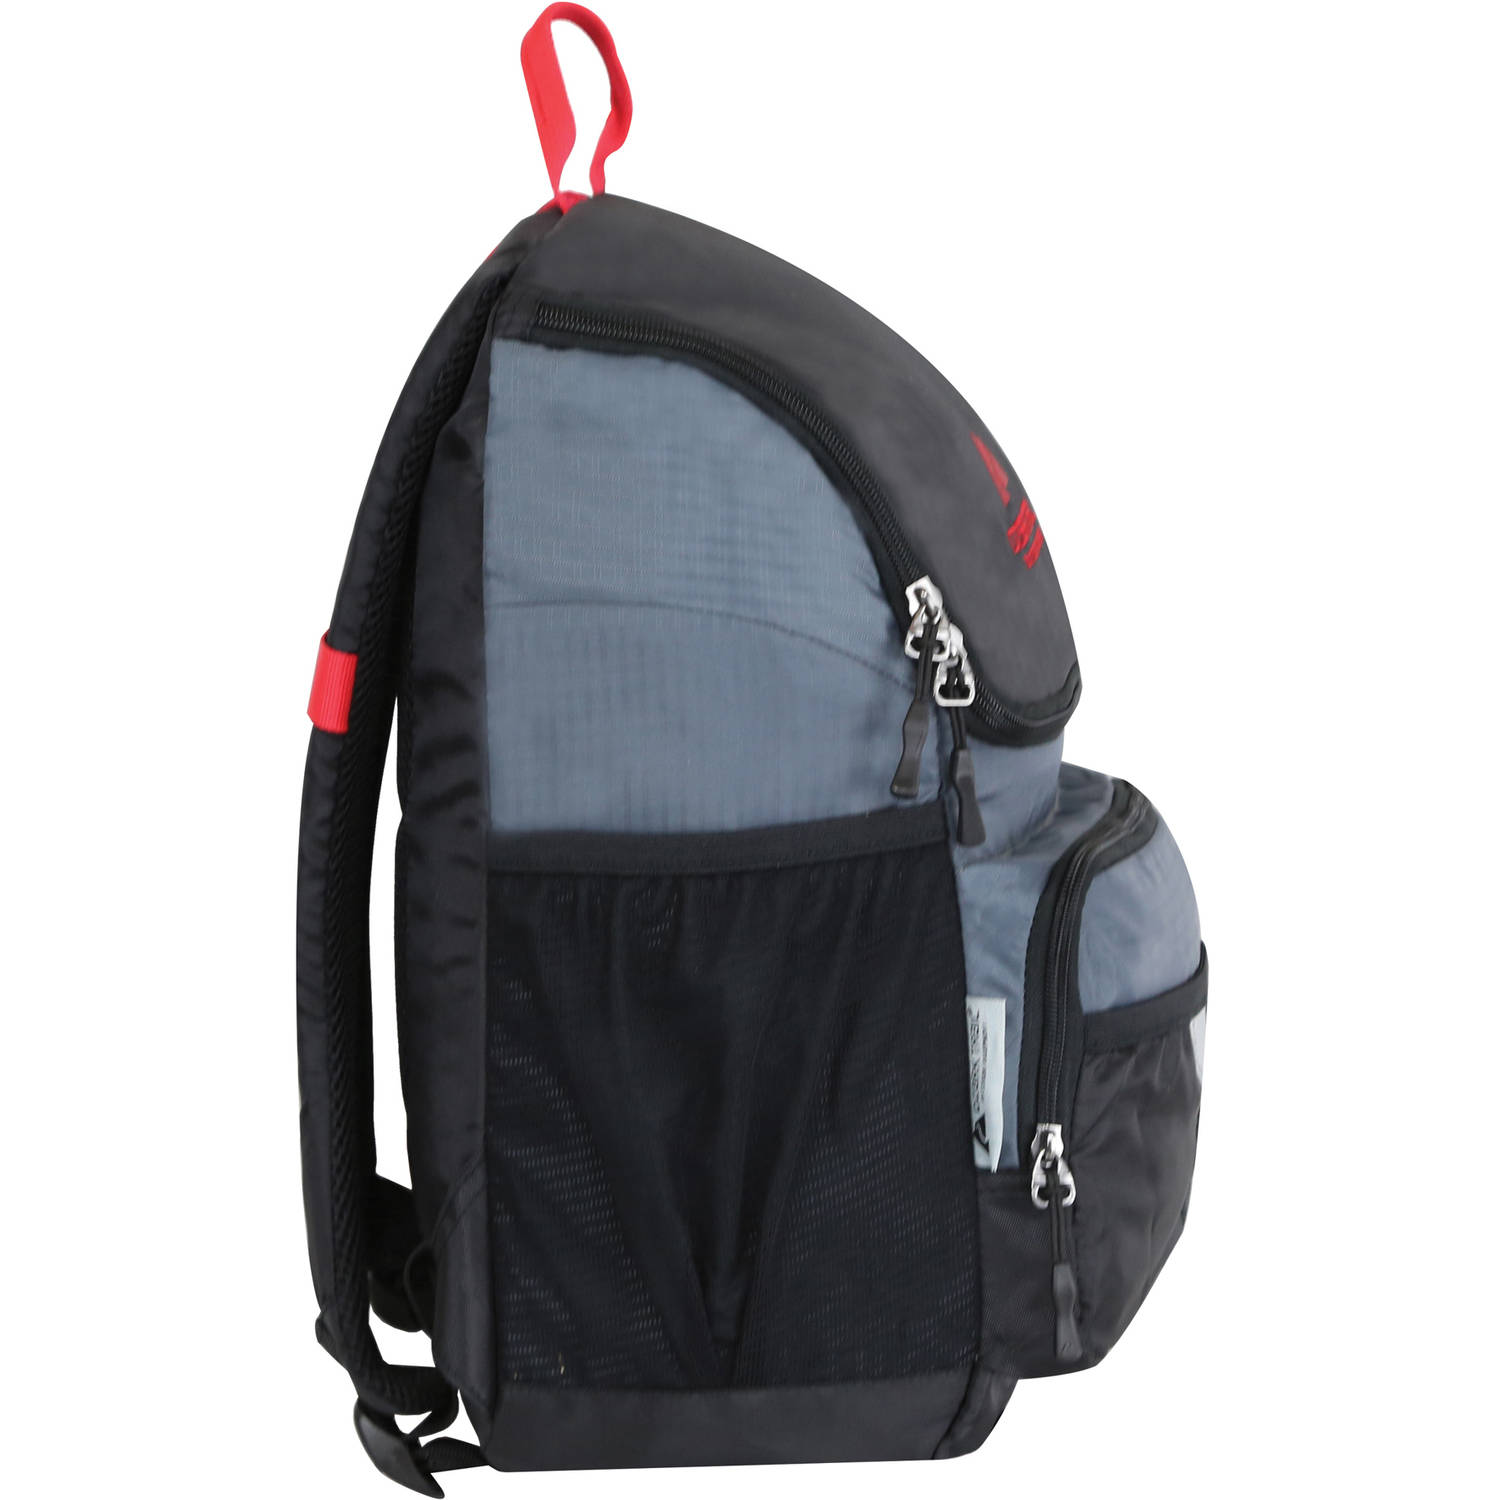 Ozark Trail 24-Can Thermal Insulated Soft Side Cooler Backpack, Black - image 5 of 5